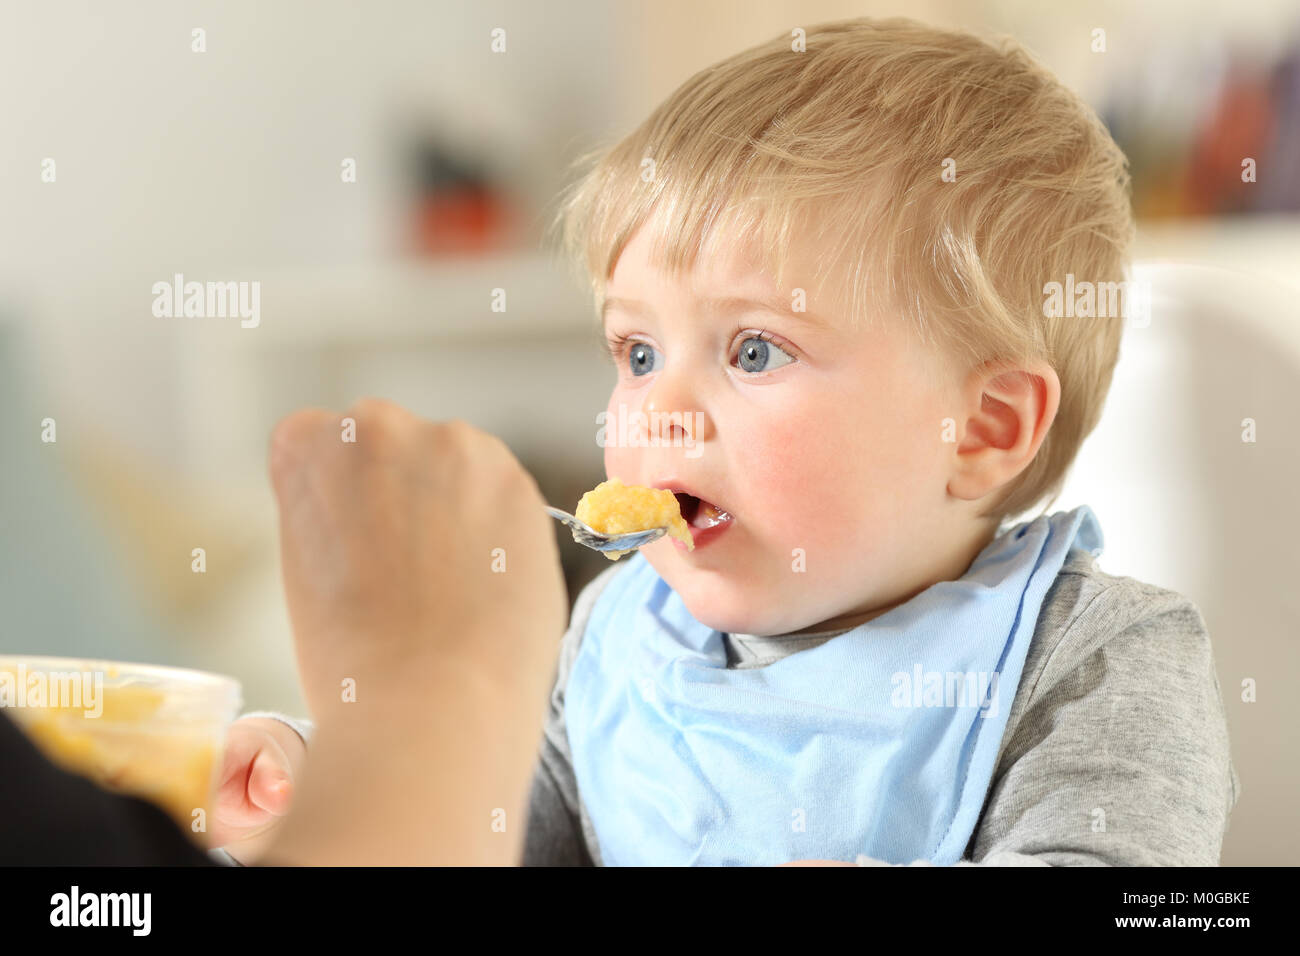 Close up portrait of a mother hand feeding a baby at home Stock Photo